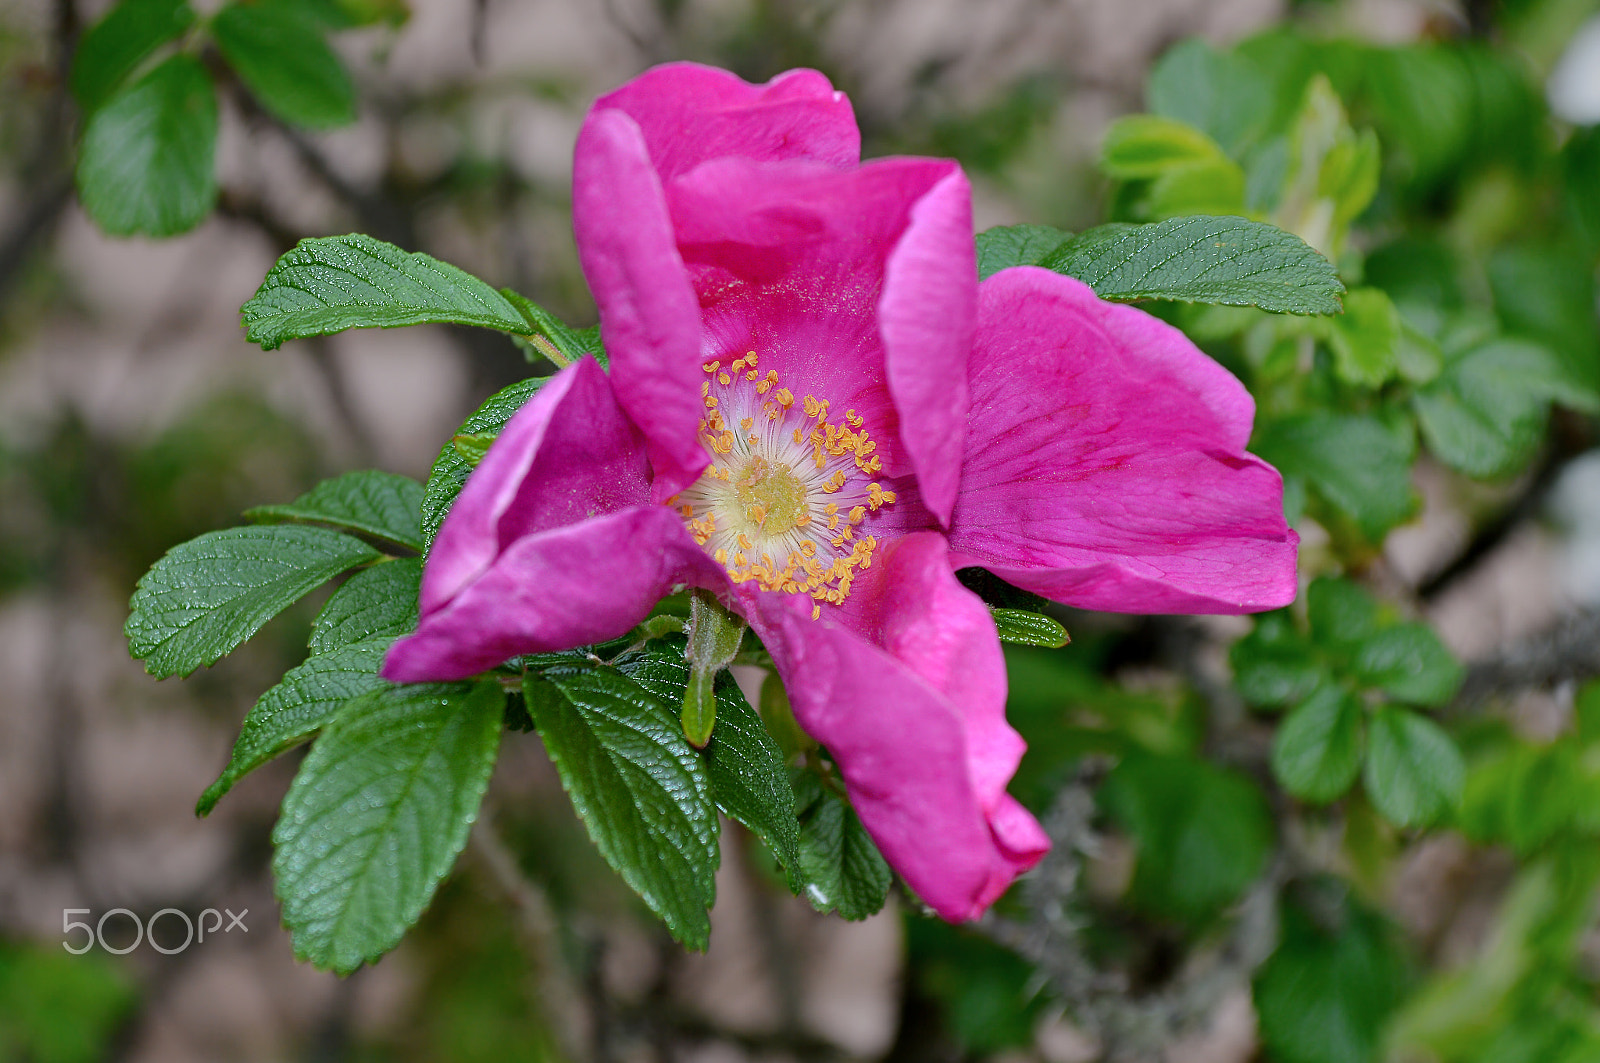 Nikon D3200 + Sigma 18-200mm F3.5-6.3 II DC OS HSM sample photo. Pink rose in bloom photography